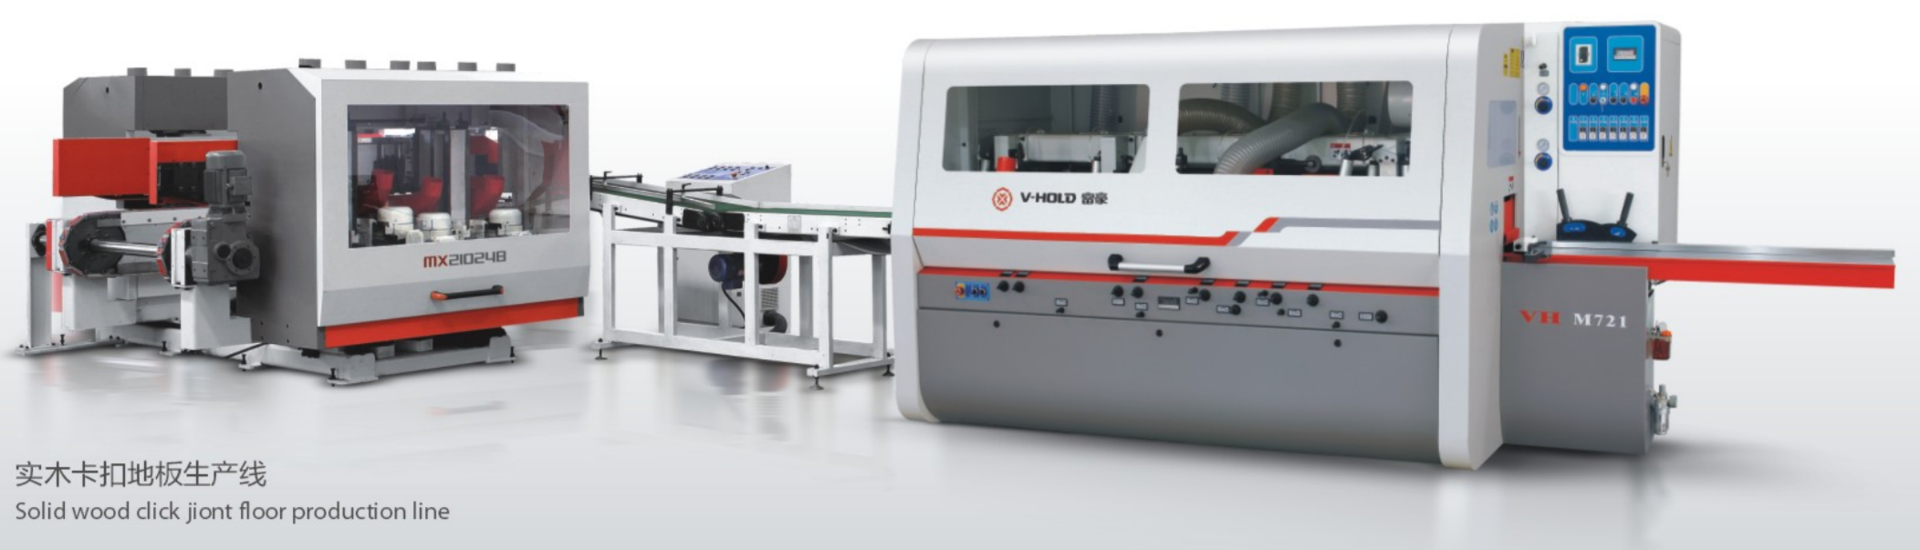 V-hold Machinery 4 sided planer for sale supplier for MDF